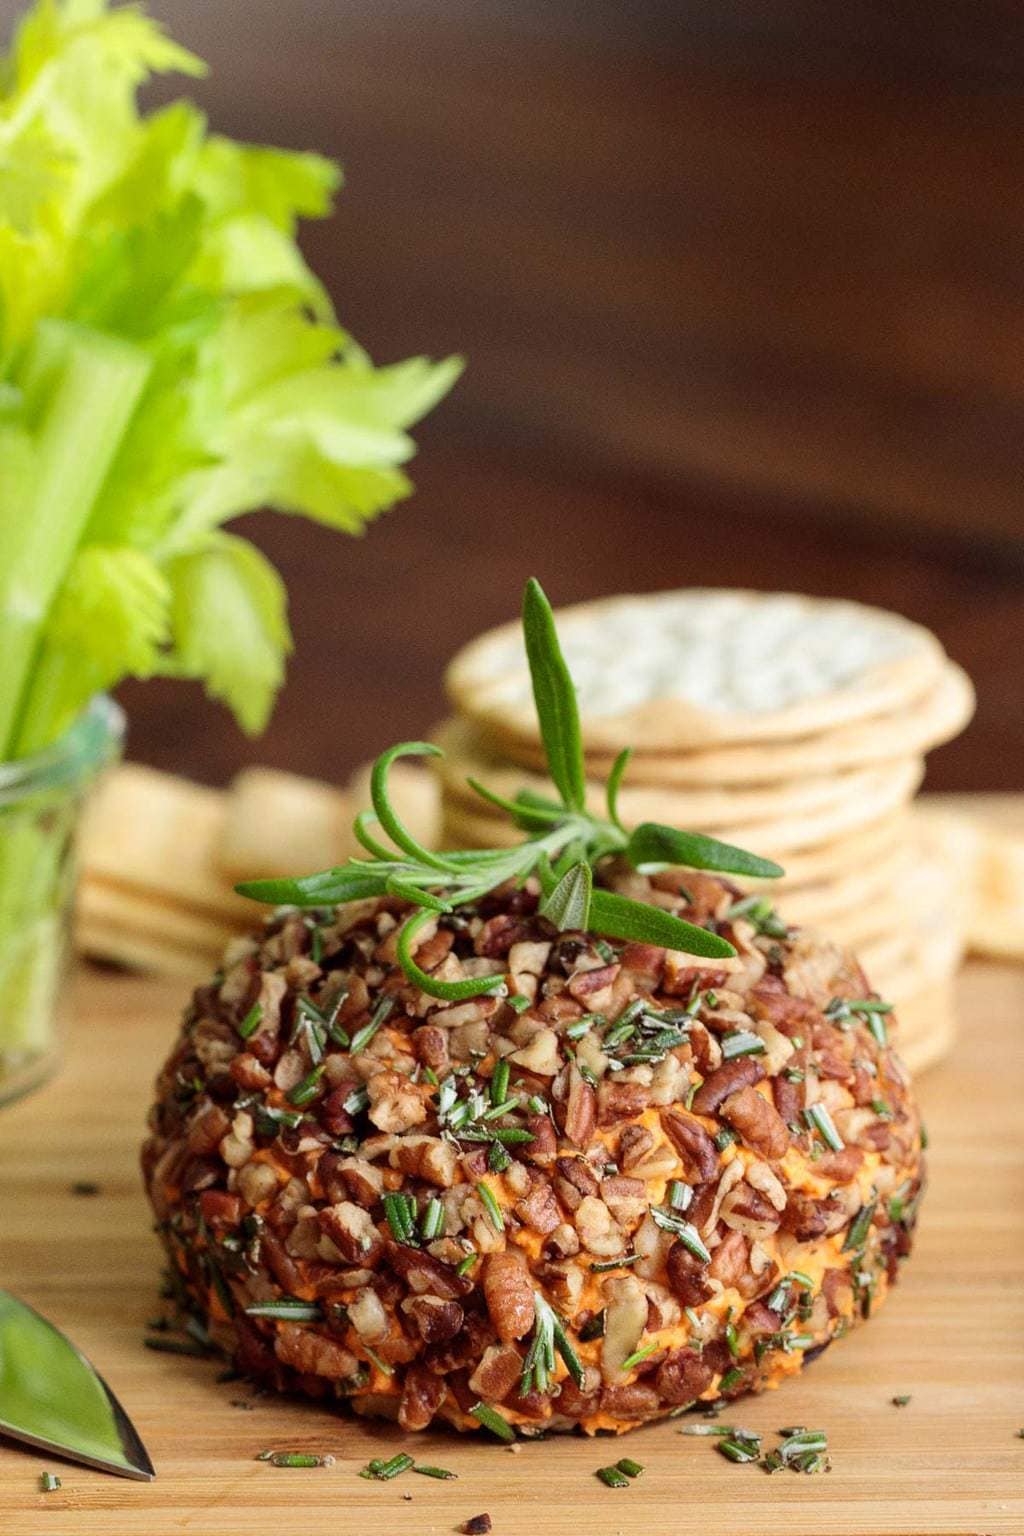 An image of a roasted red pepper and goat cheese cheeseball covered with toasted pecans.